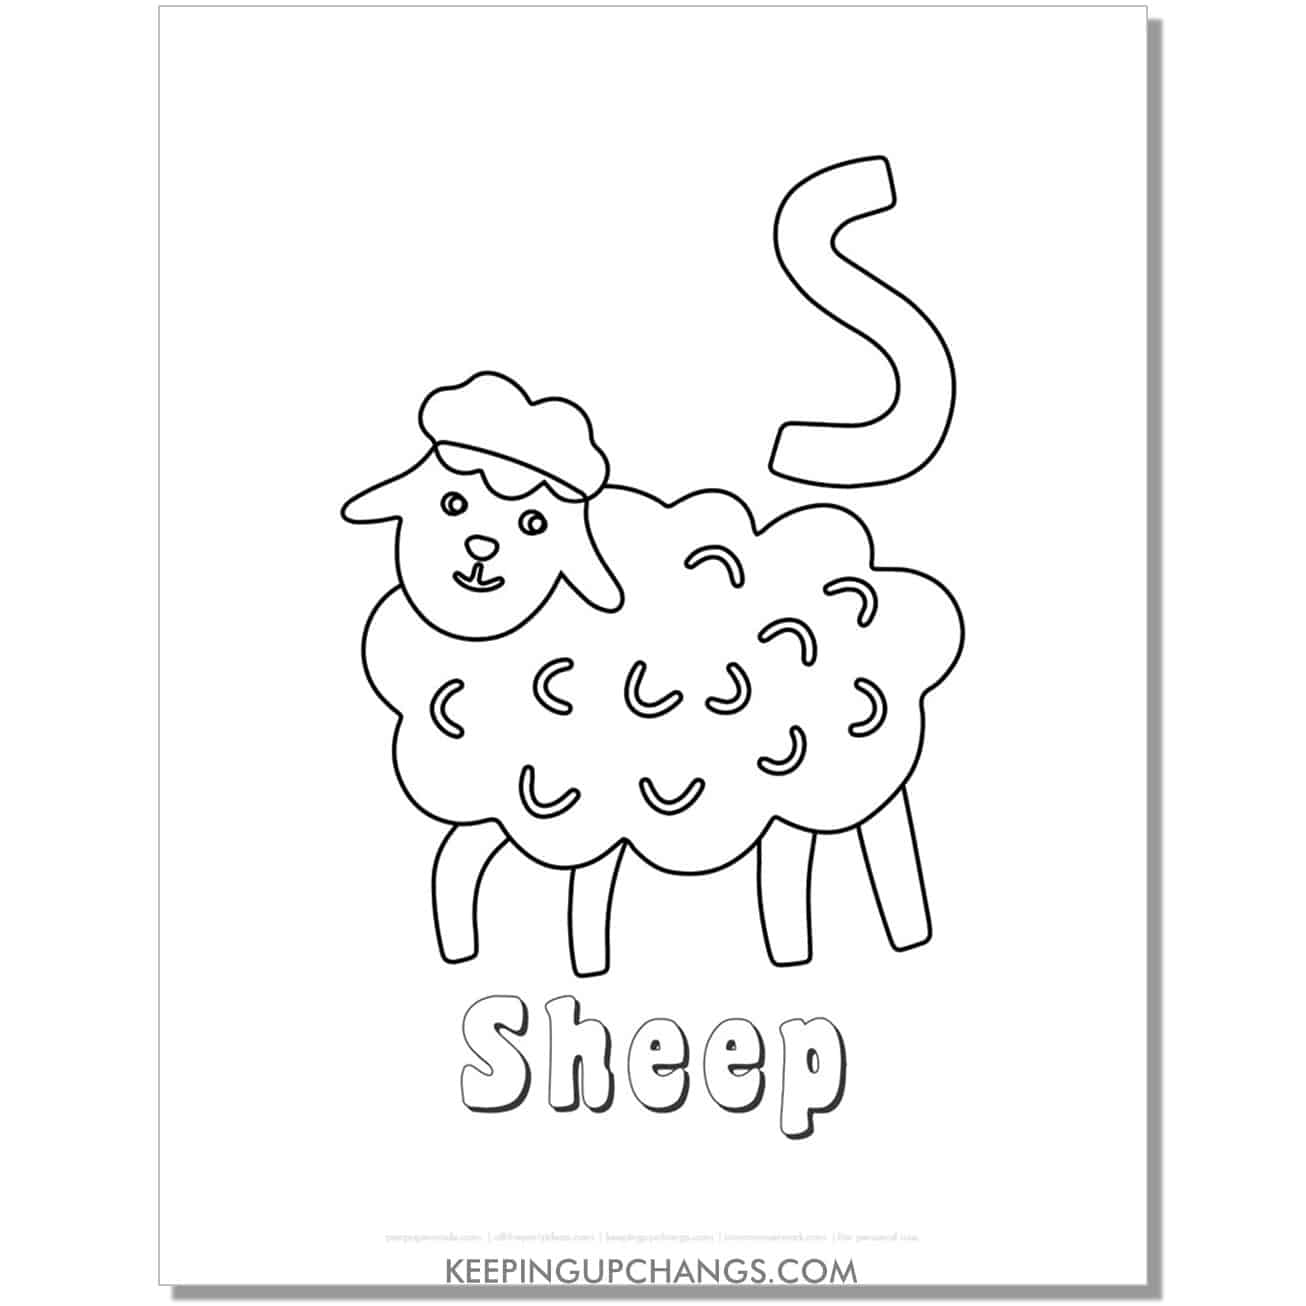 fun abc s coloring page with sheep hand drawing.